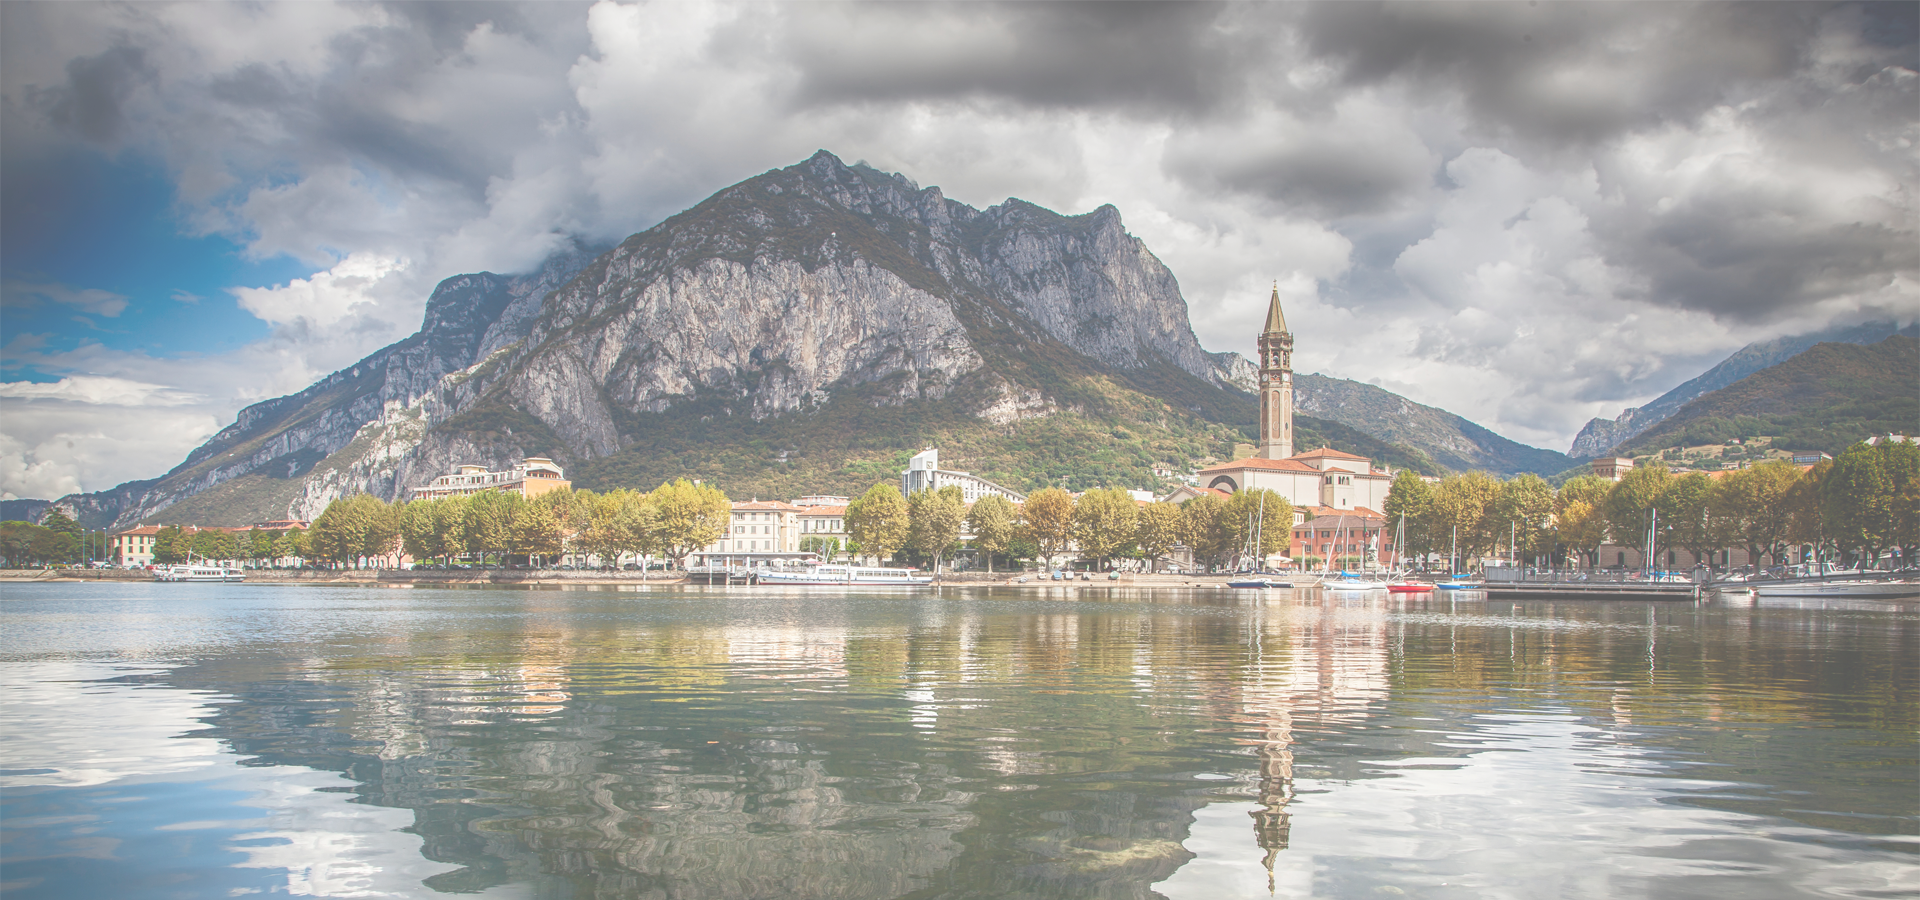 <b>Lecco, Lombardy, Italy</b>